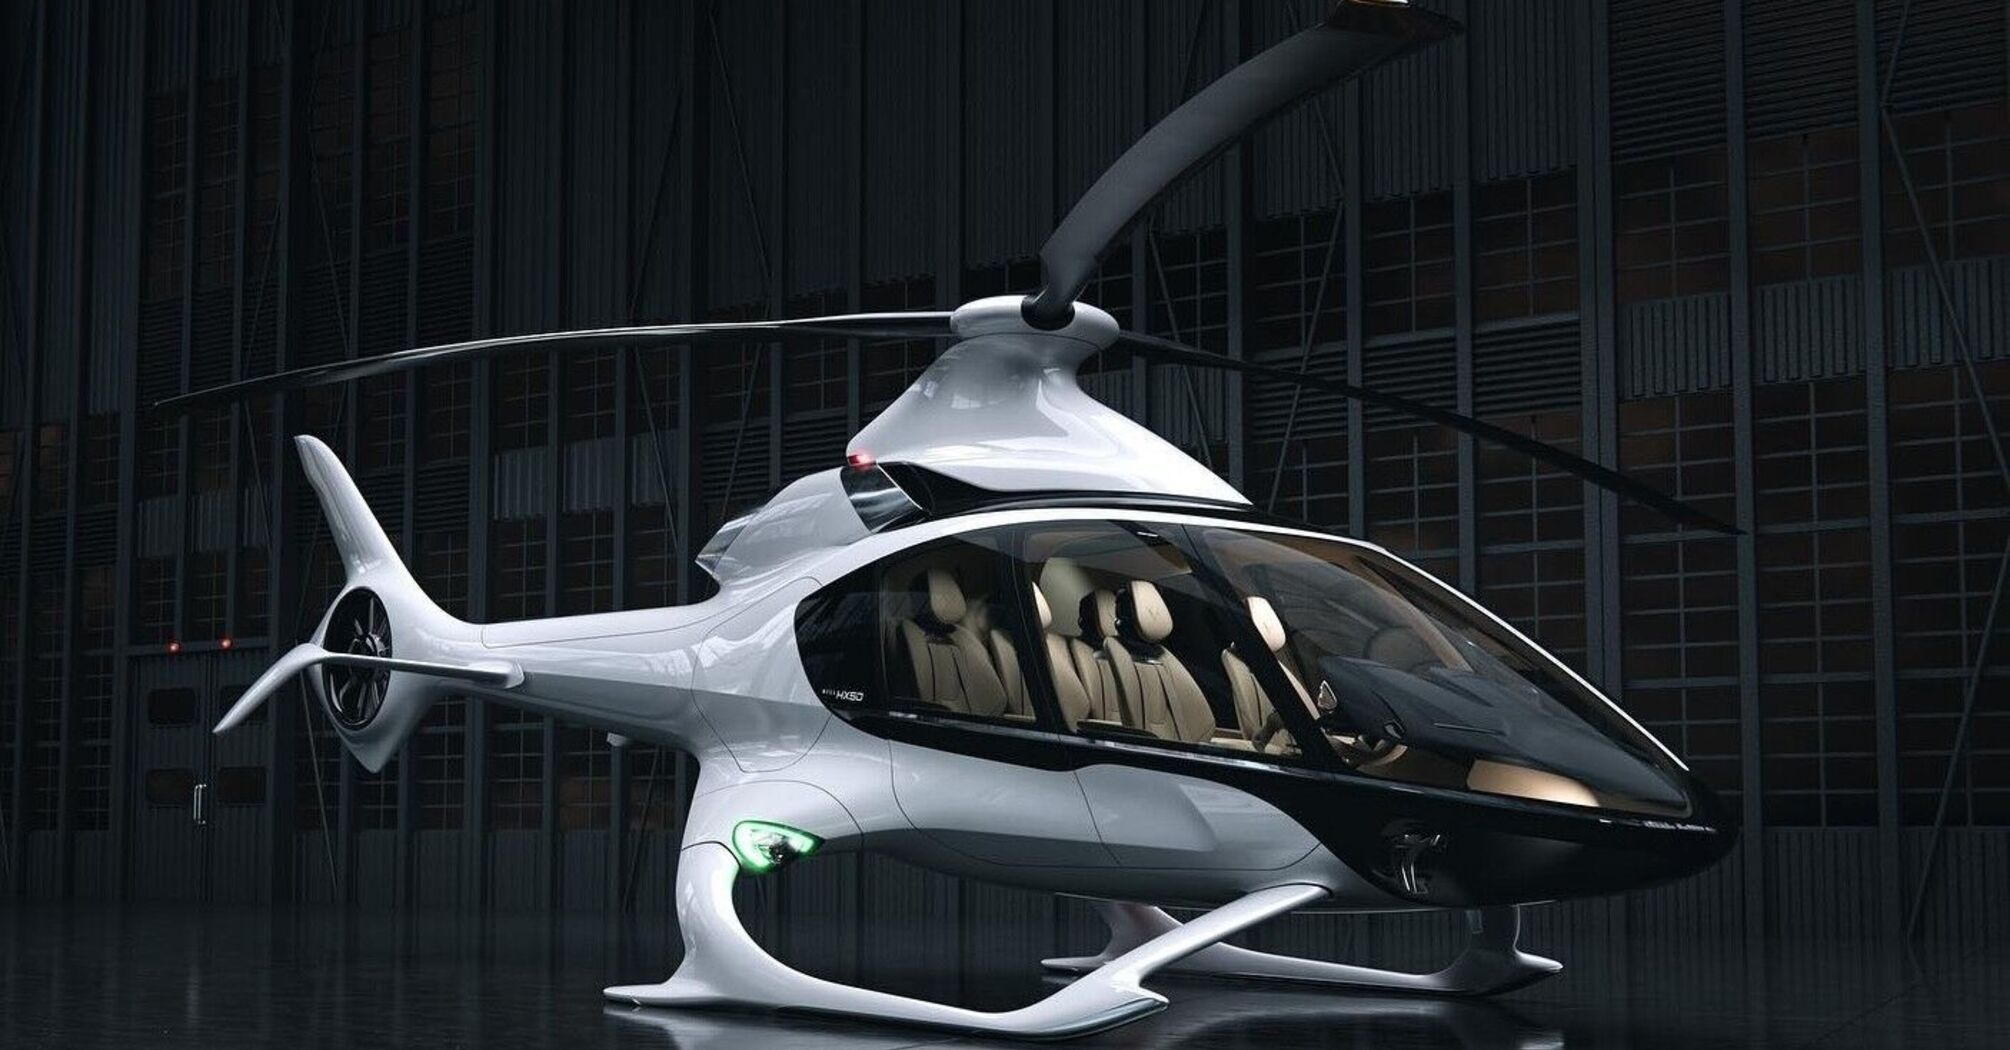 A new star: Hill's HX50 personal helicopter will soon appear on the market